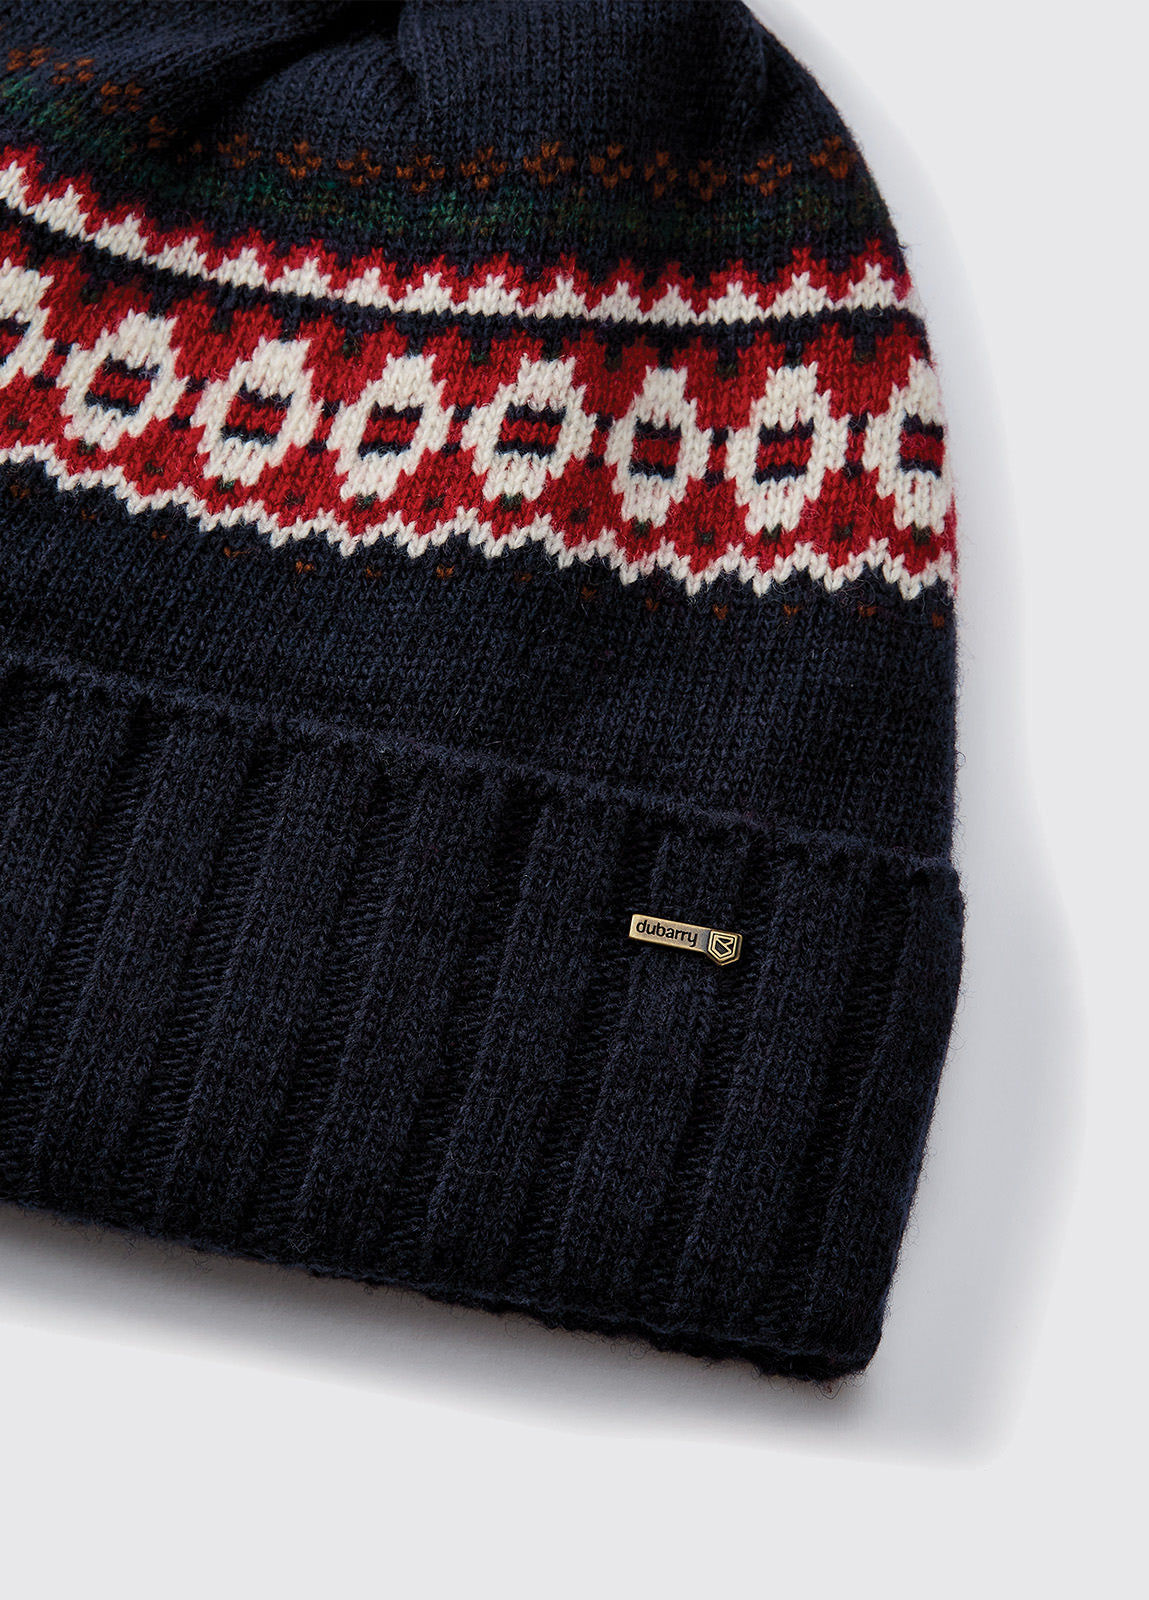 Dubarry Kilcormac Knitted Hat - Navy